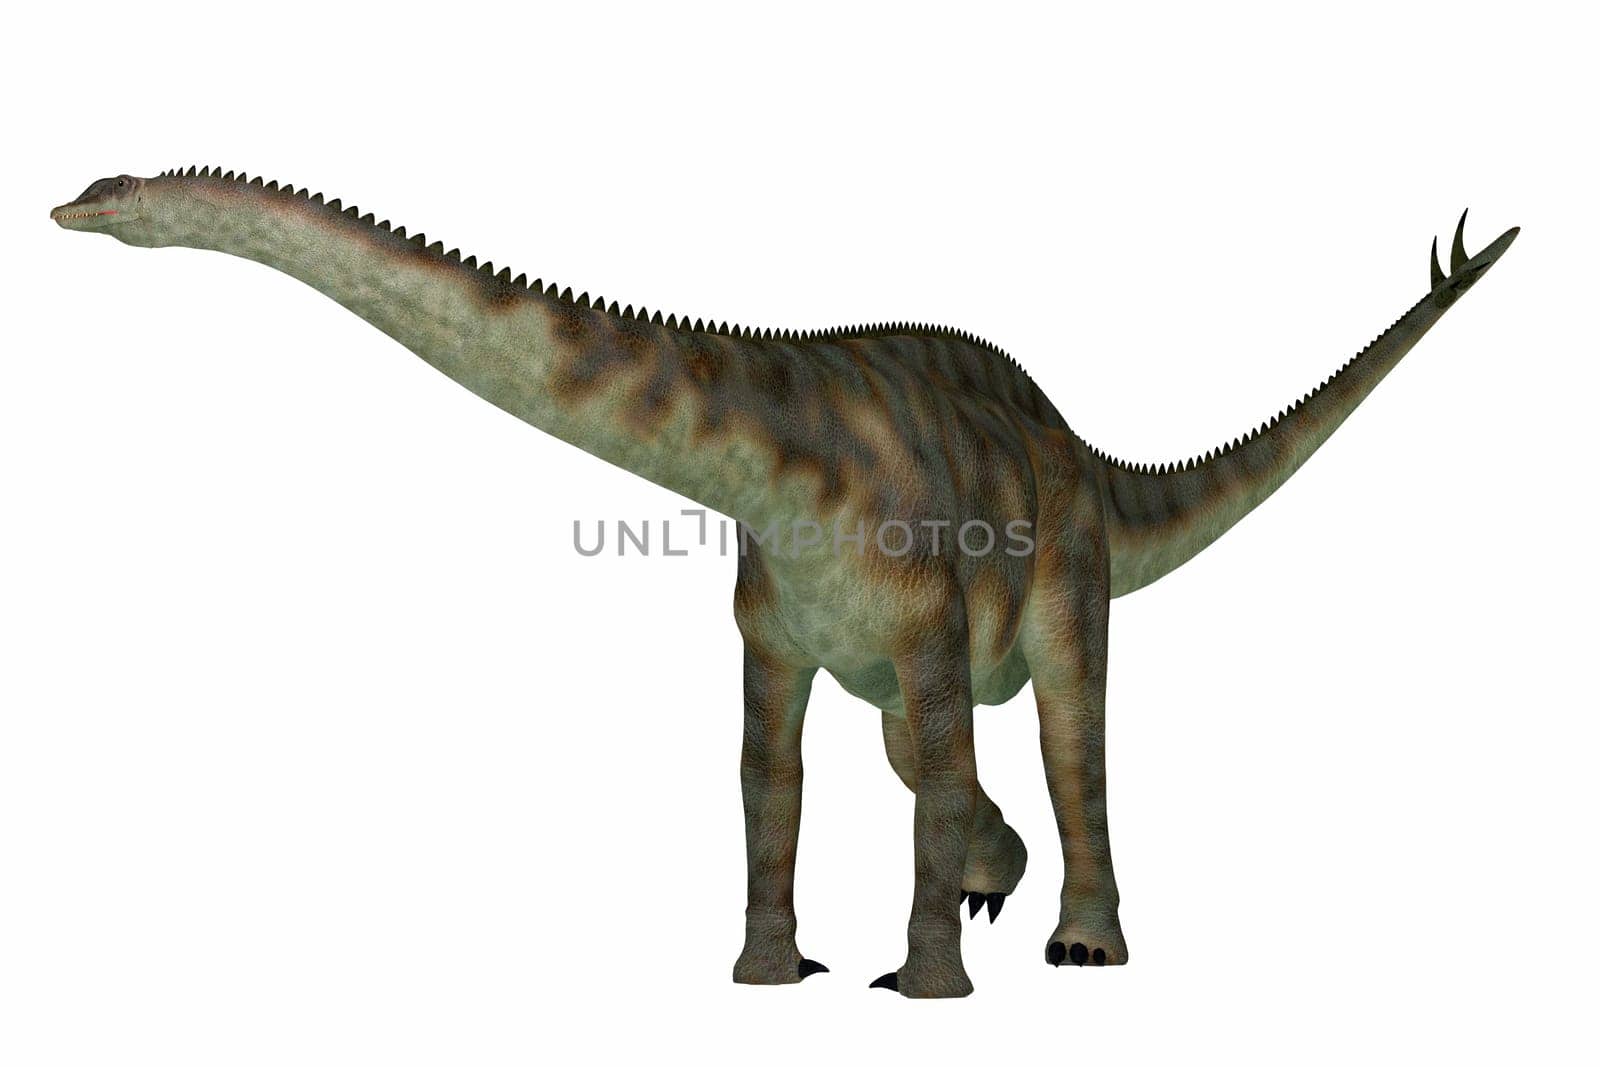 Spinophorosaurus was a herbivorous sauropod dinosaur that lived in the Jurassic Period of Niger, Africa.